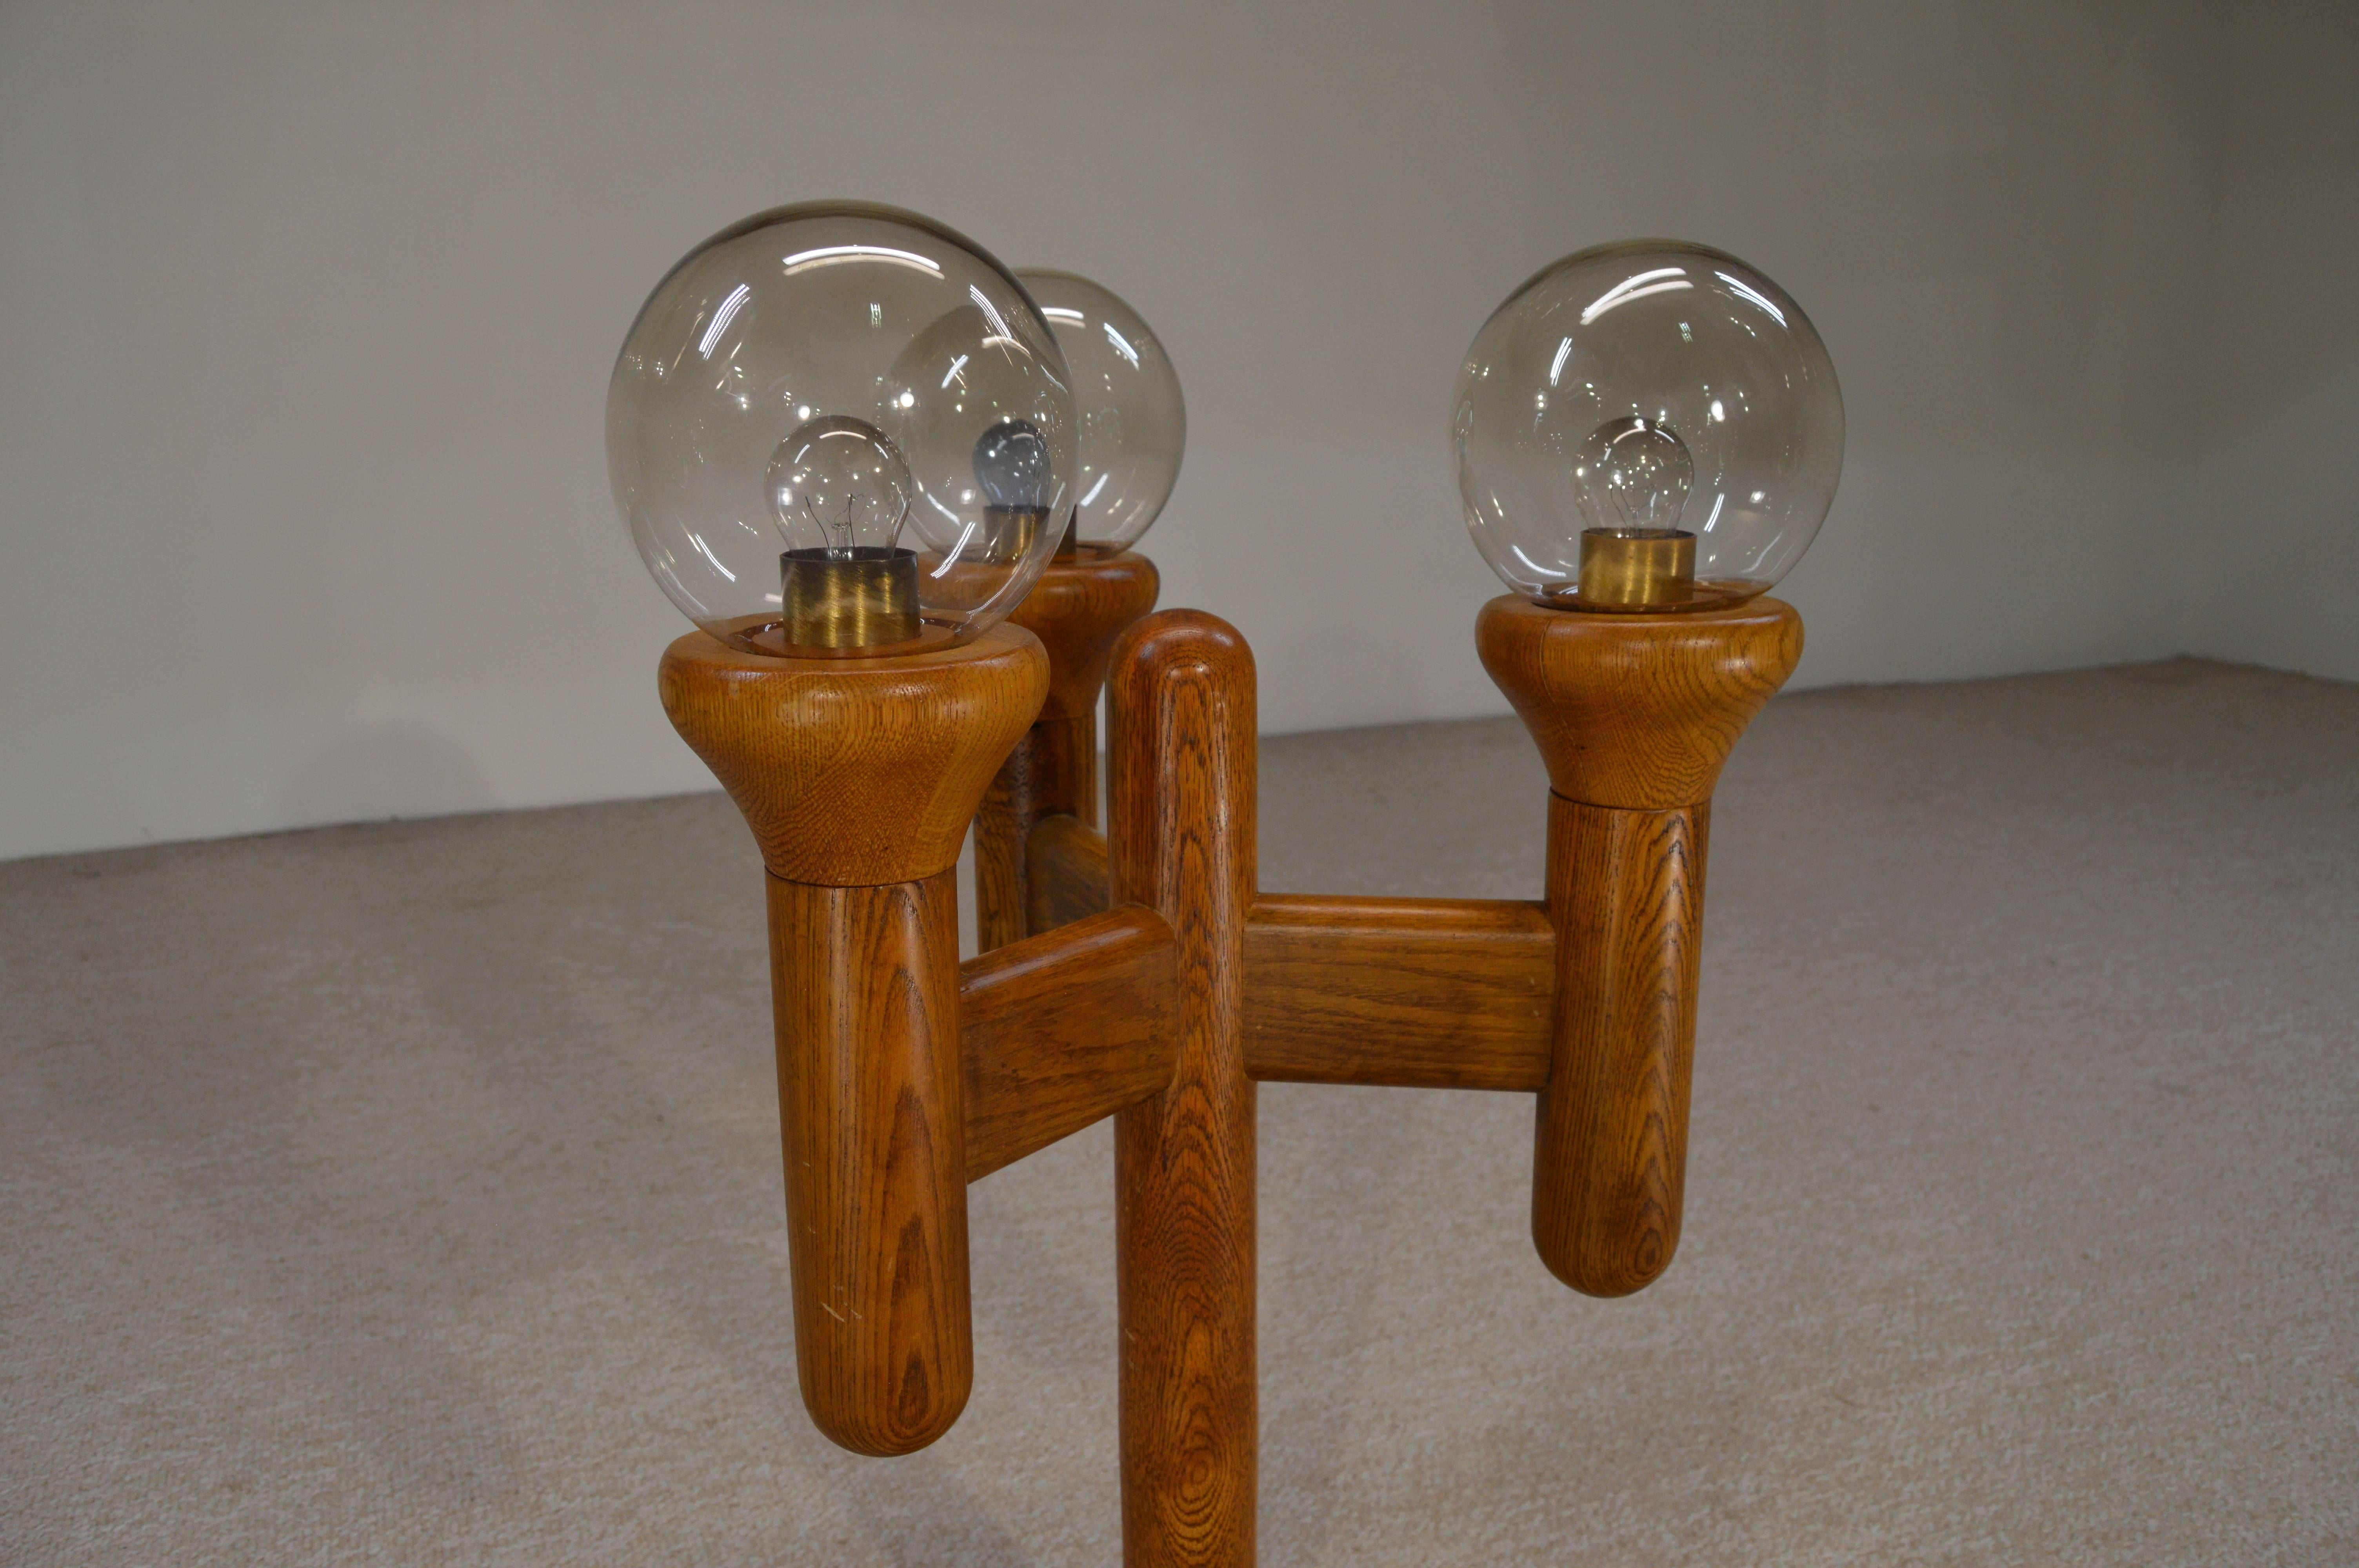 An awesome lamp constructed of solid oak carefully selected for its grain patterns and dawning three clear retro glass globes. Features a dimmer switch. Tested and functioning perfectly, circa 1960.